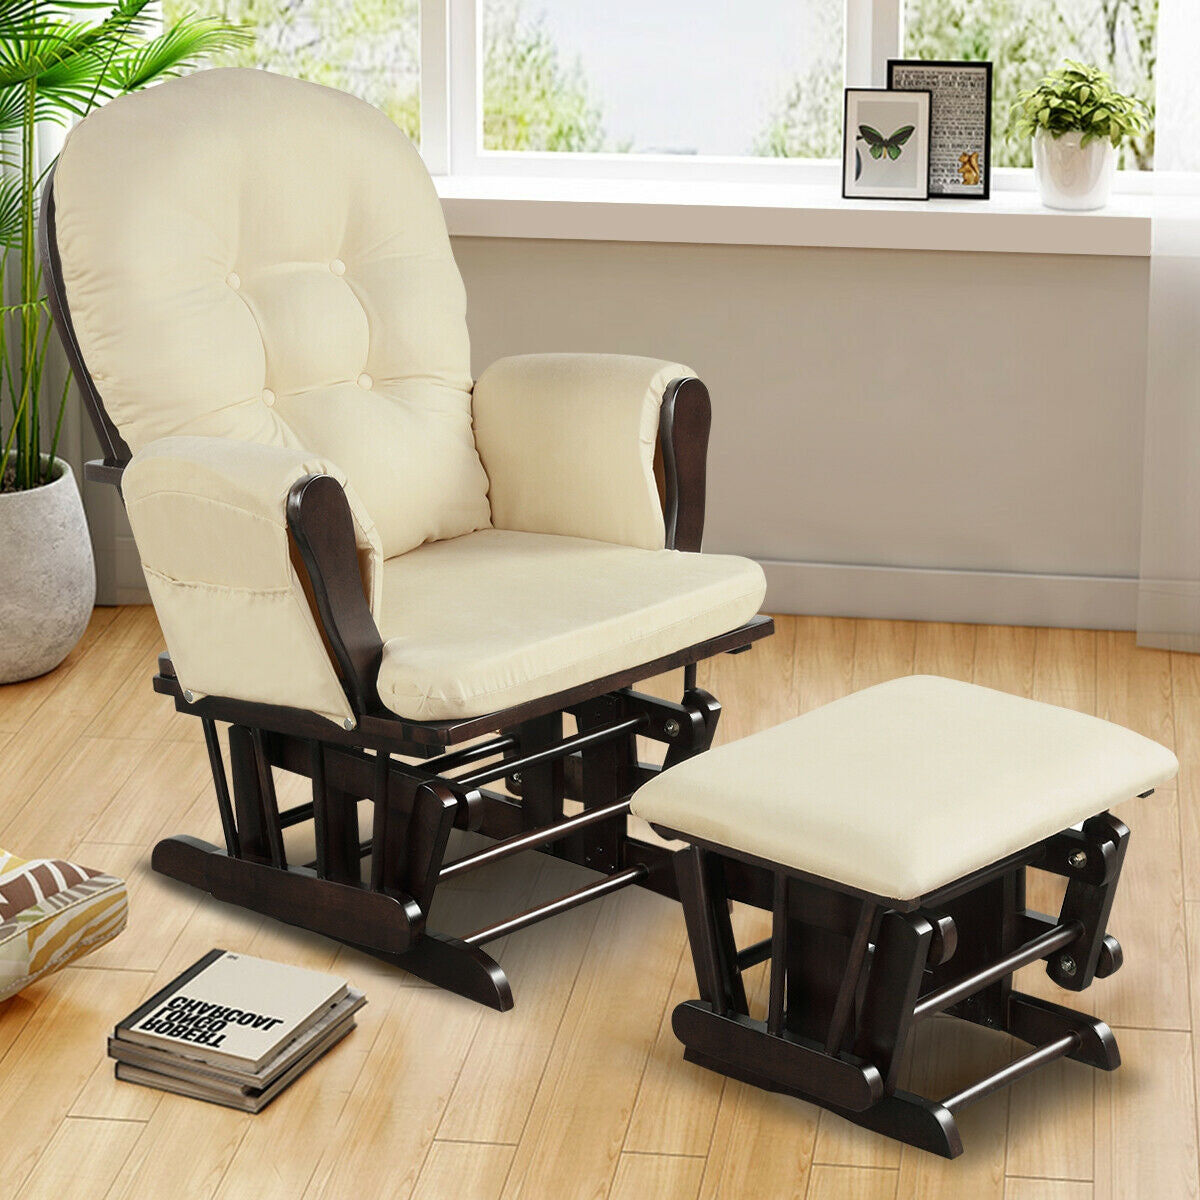 Wood Glider and Ottoman Set with Padded Armrests and Detachable Cushion-Beige